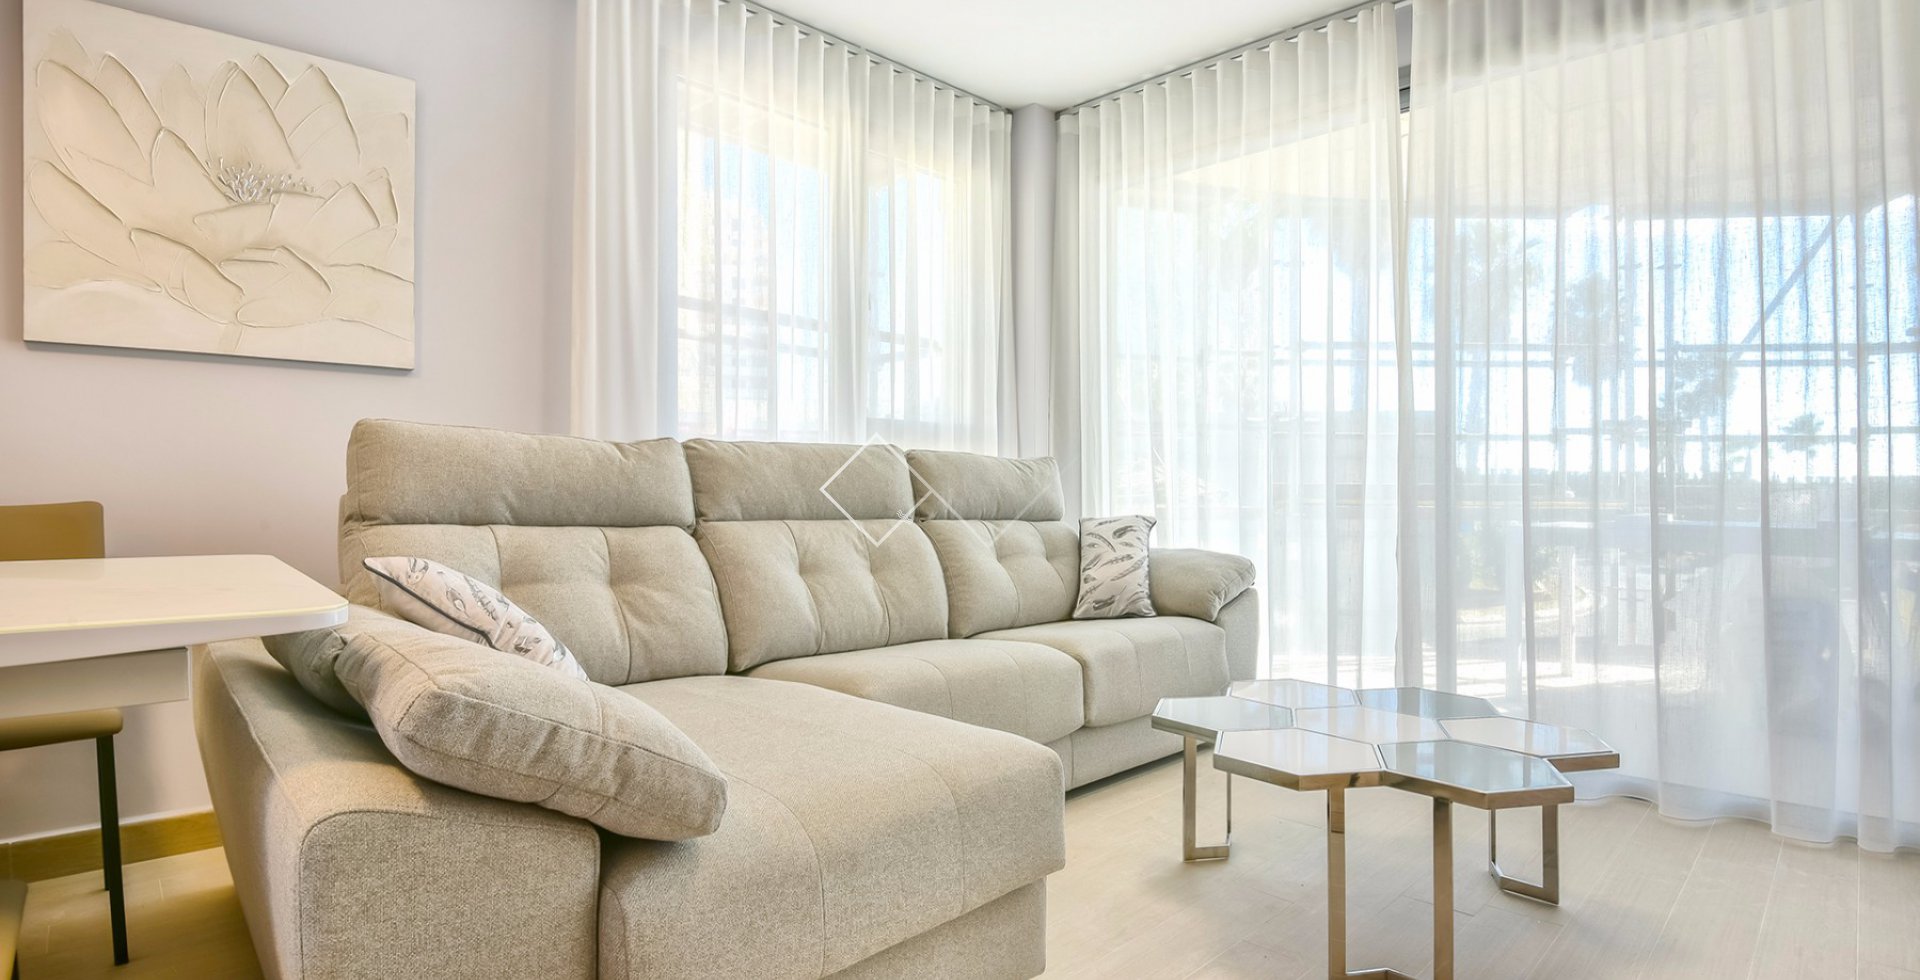 living room - 4 bed apartment in luxurious building, Calpe